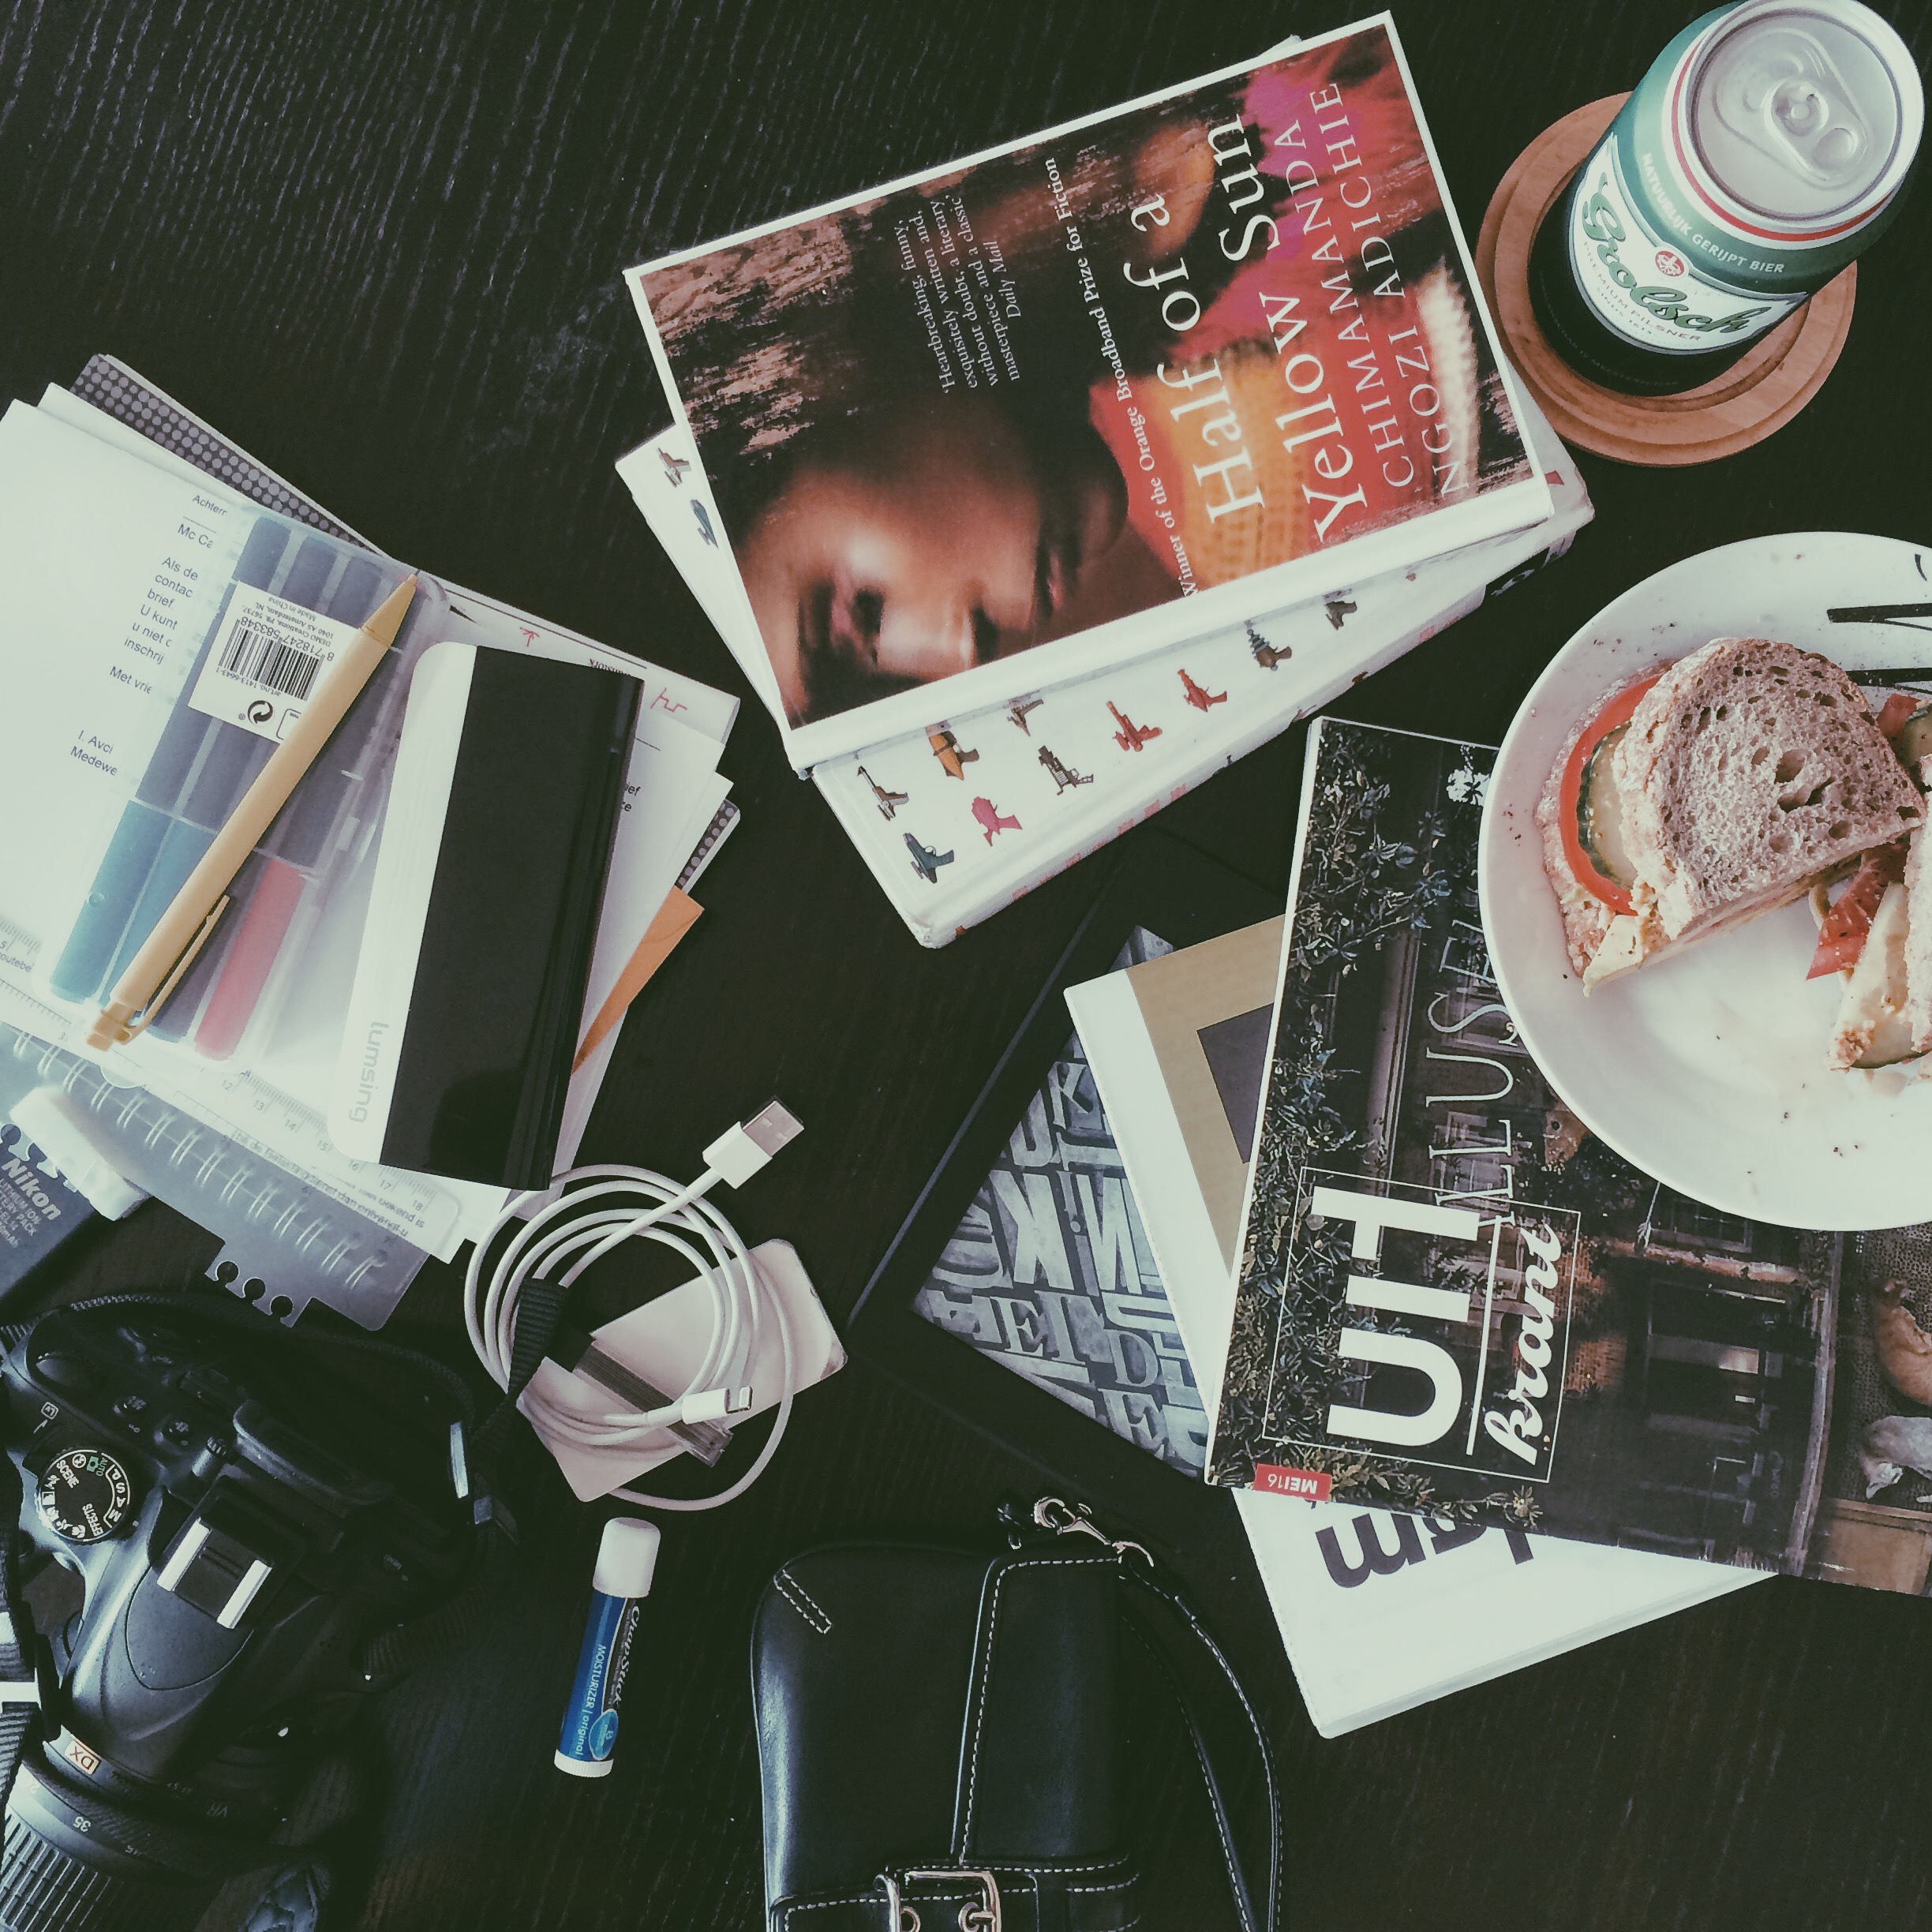 after a trip to the library, I dumped the contents of my bag on to the table. Pictured here: Chimamanda Ngozi Adichie's Half of a Yellow Sun, Charles Yu's How to Live Safely in a Science Fictional Universe, Nikon camera, proofreading pens, Grolsch, sandwich